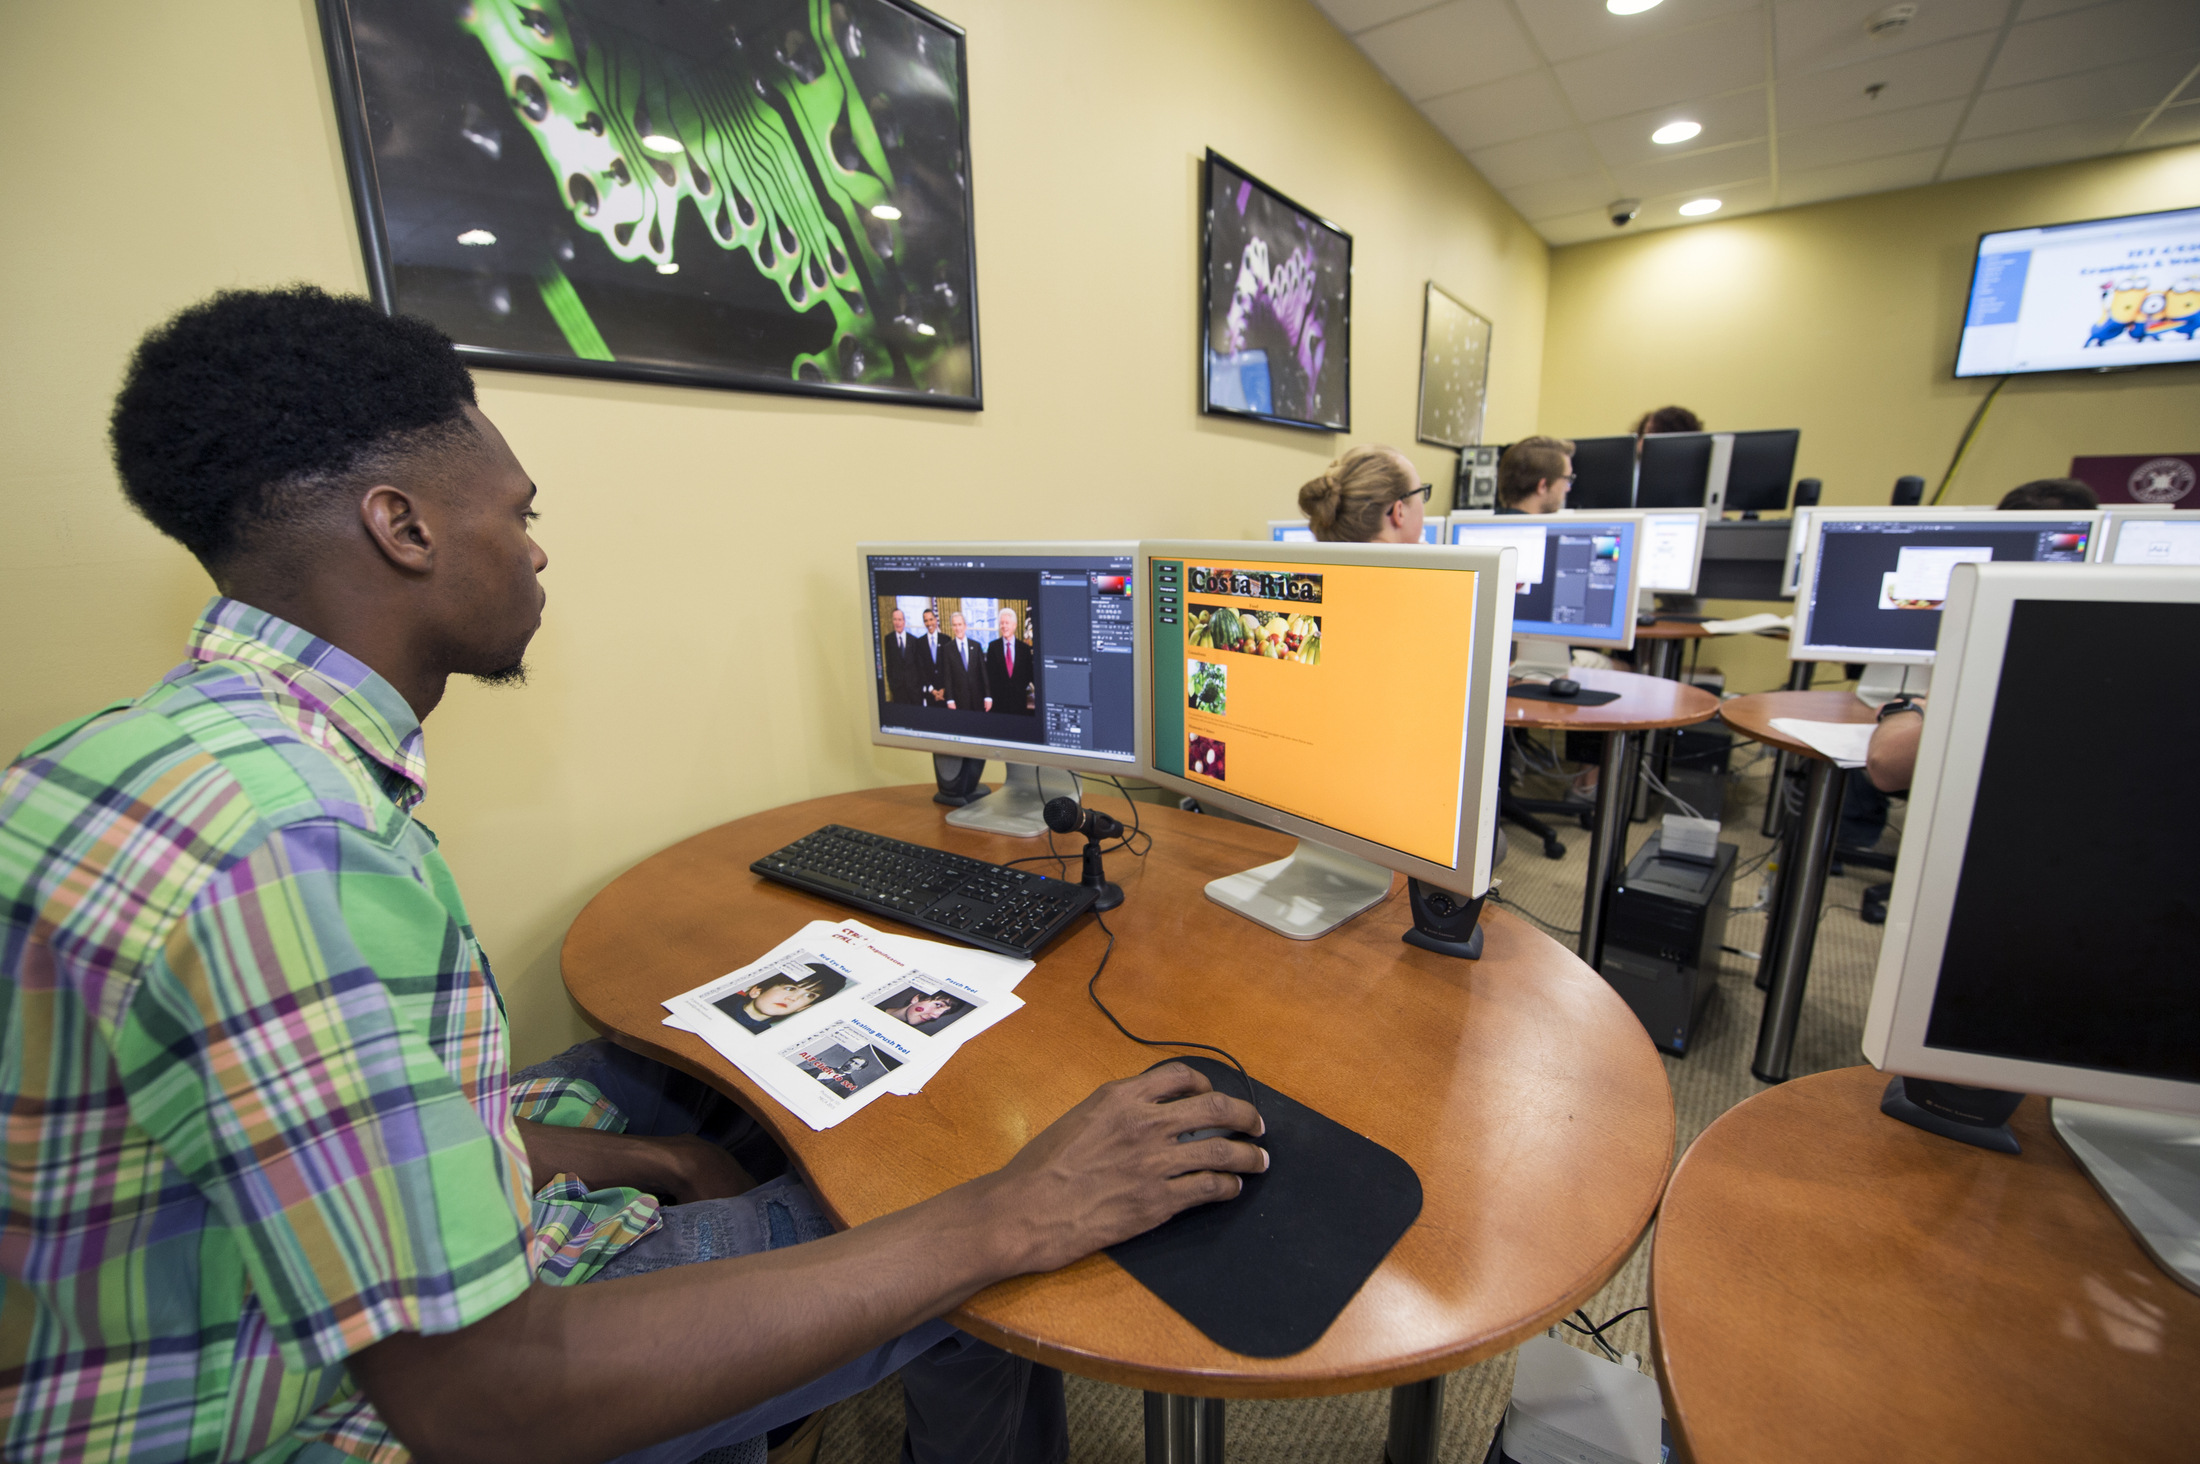 Students and faculty already are using the Department of Instructional Systems and Workforce Development's new multimedia classroom that will be fully integrated into a recently revised IT master's degree curriculum available this fall.